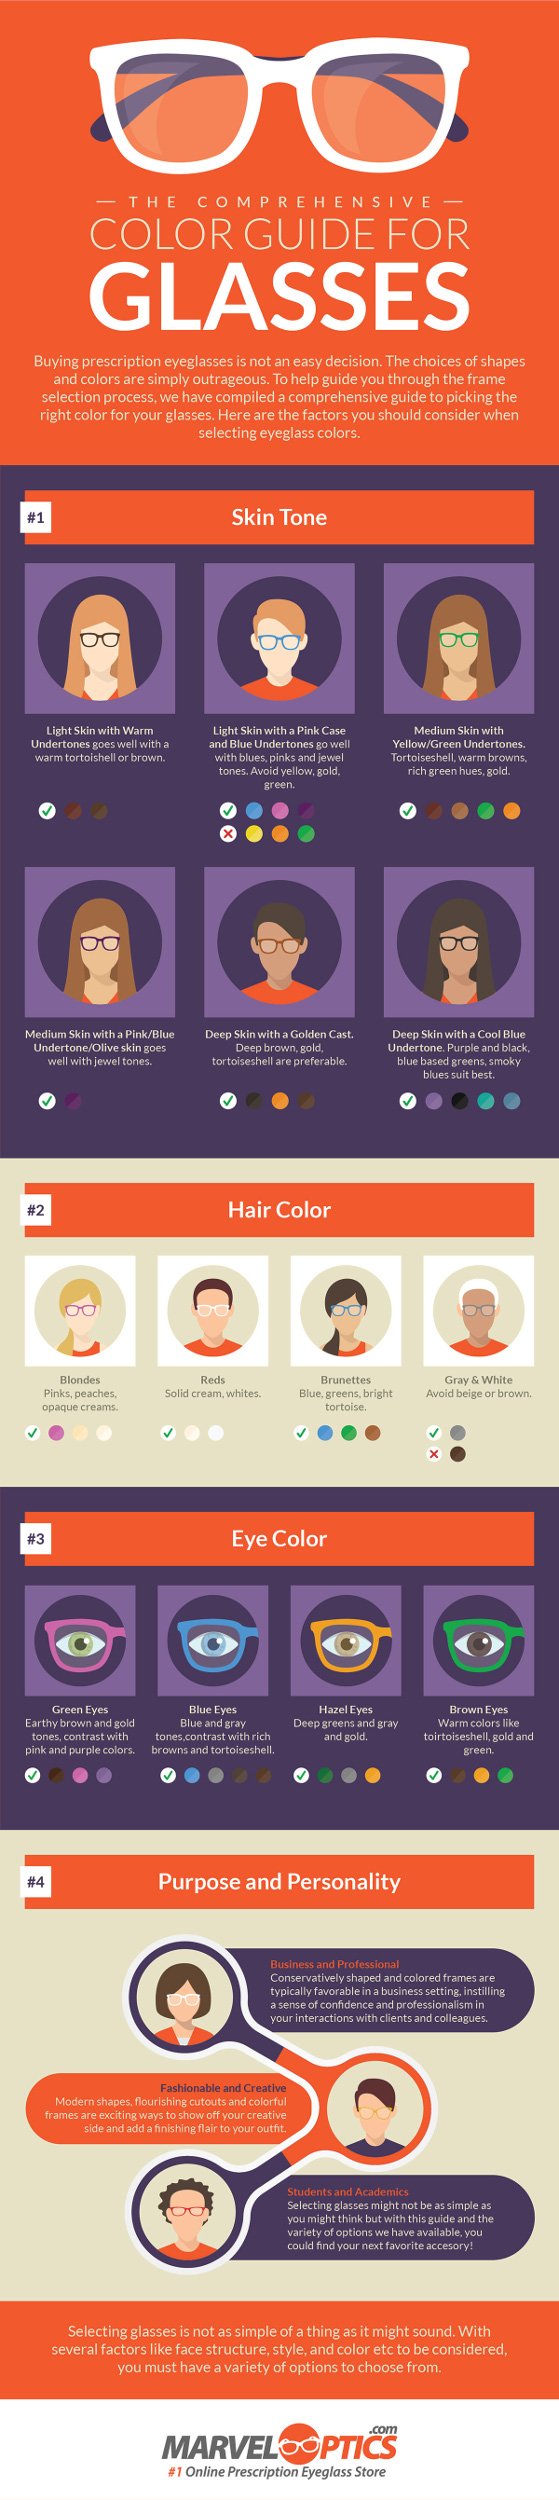 Color Guide For Selecting Perfect Eyeglasses